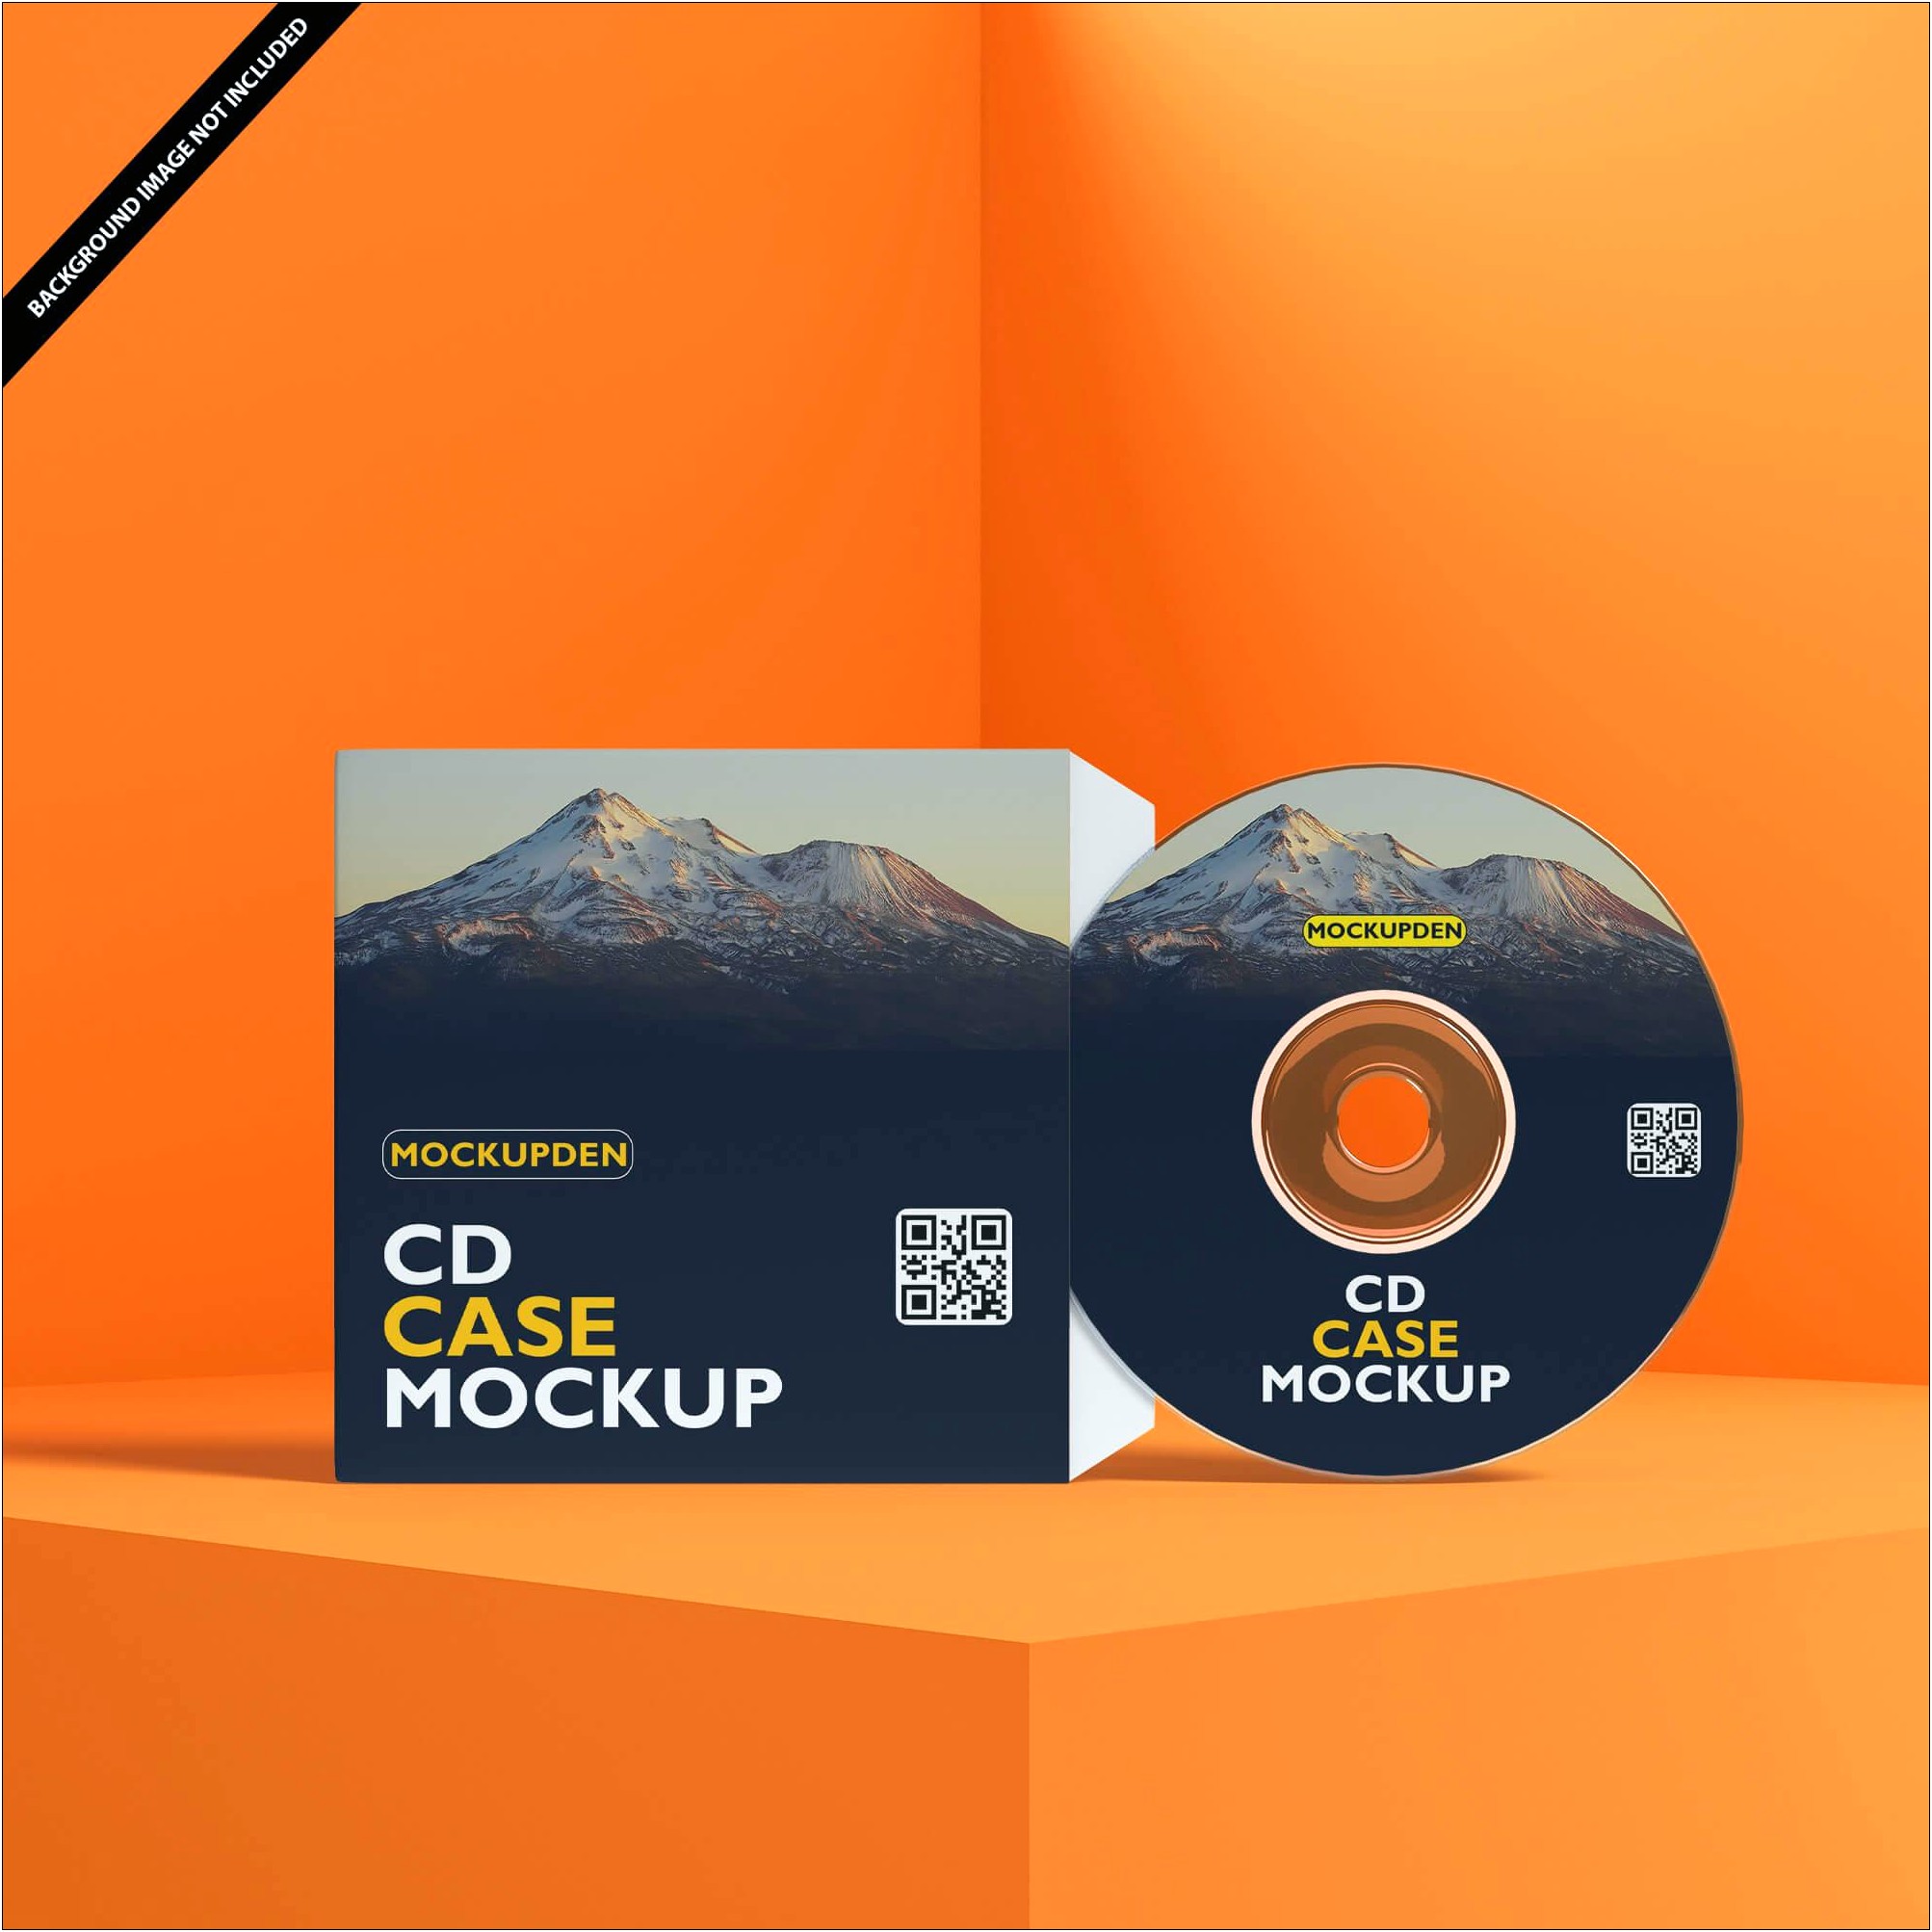 cd-label-template-psd-free-download-templates-resume-designs